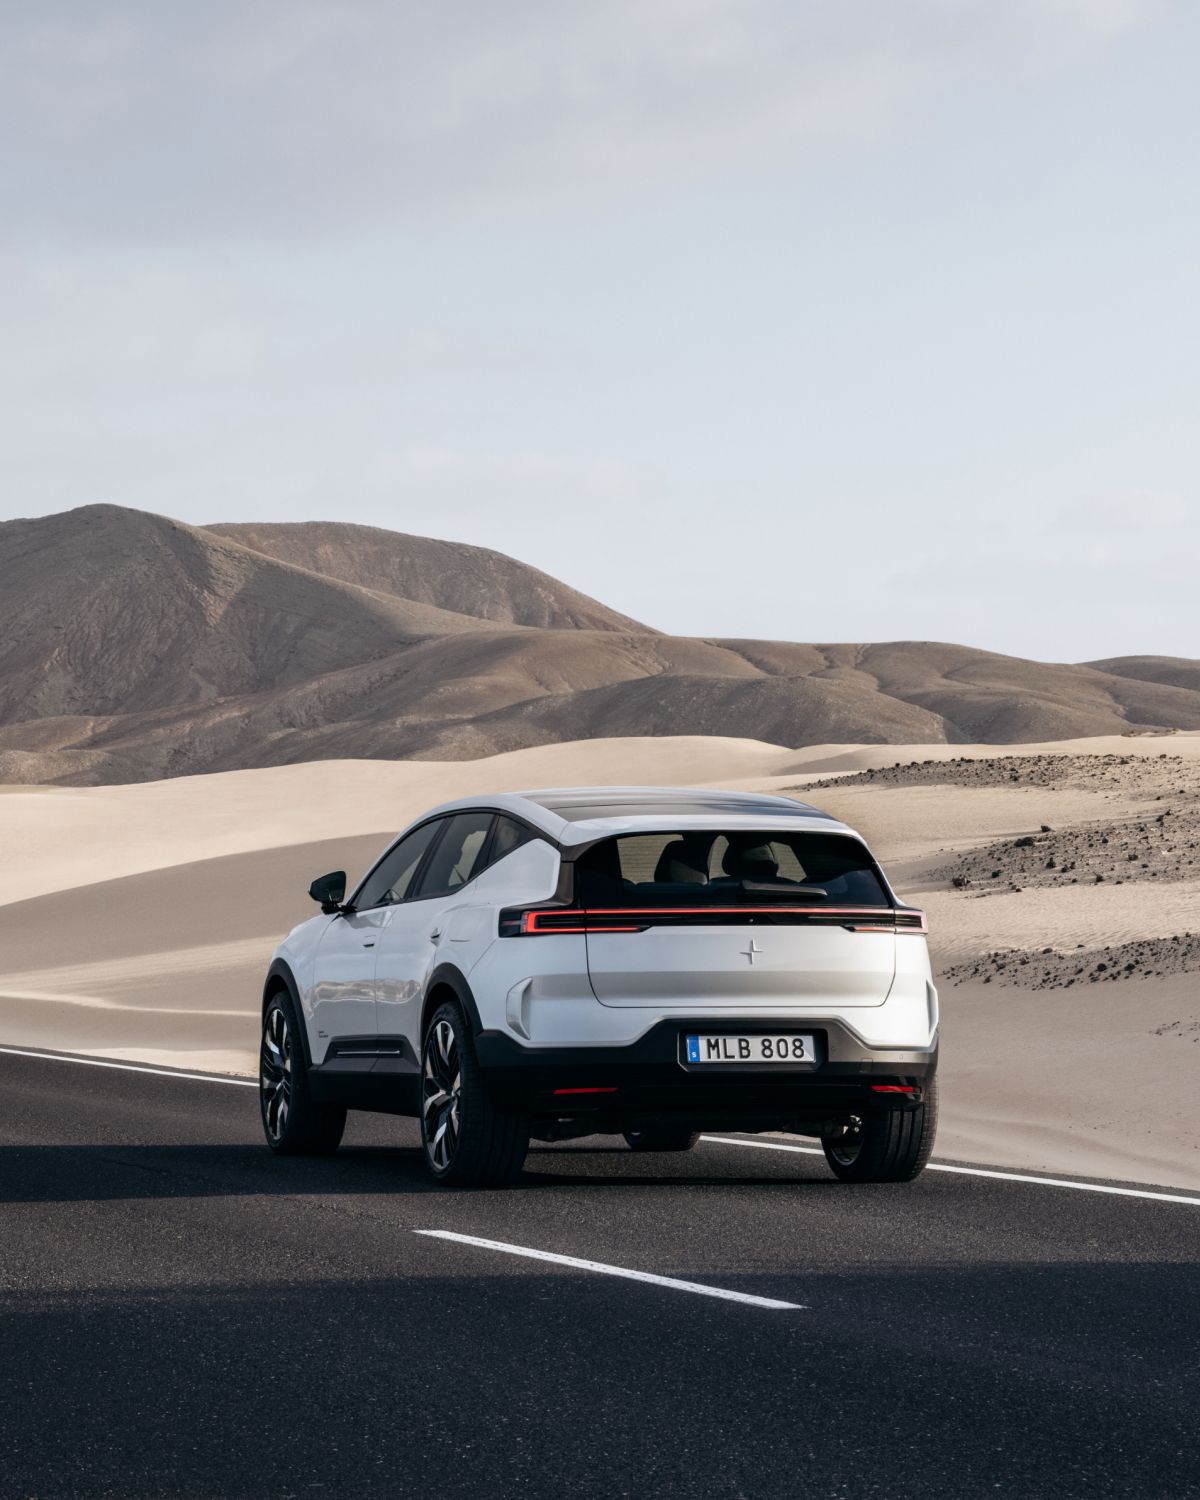 Back of Polestar 3, standing on a road in a desert looking environment